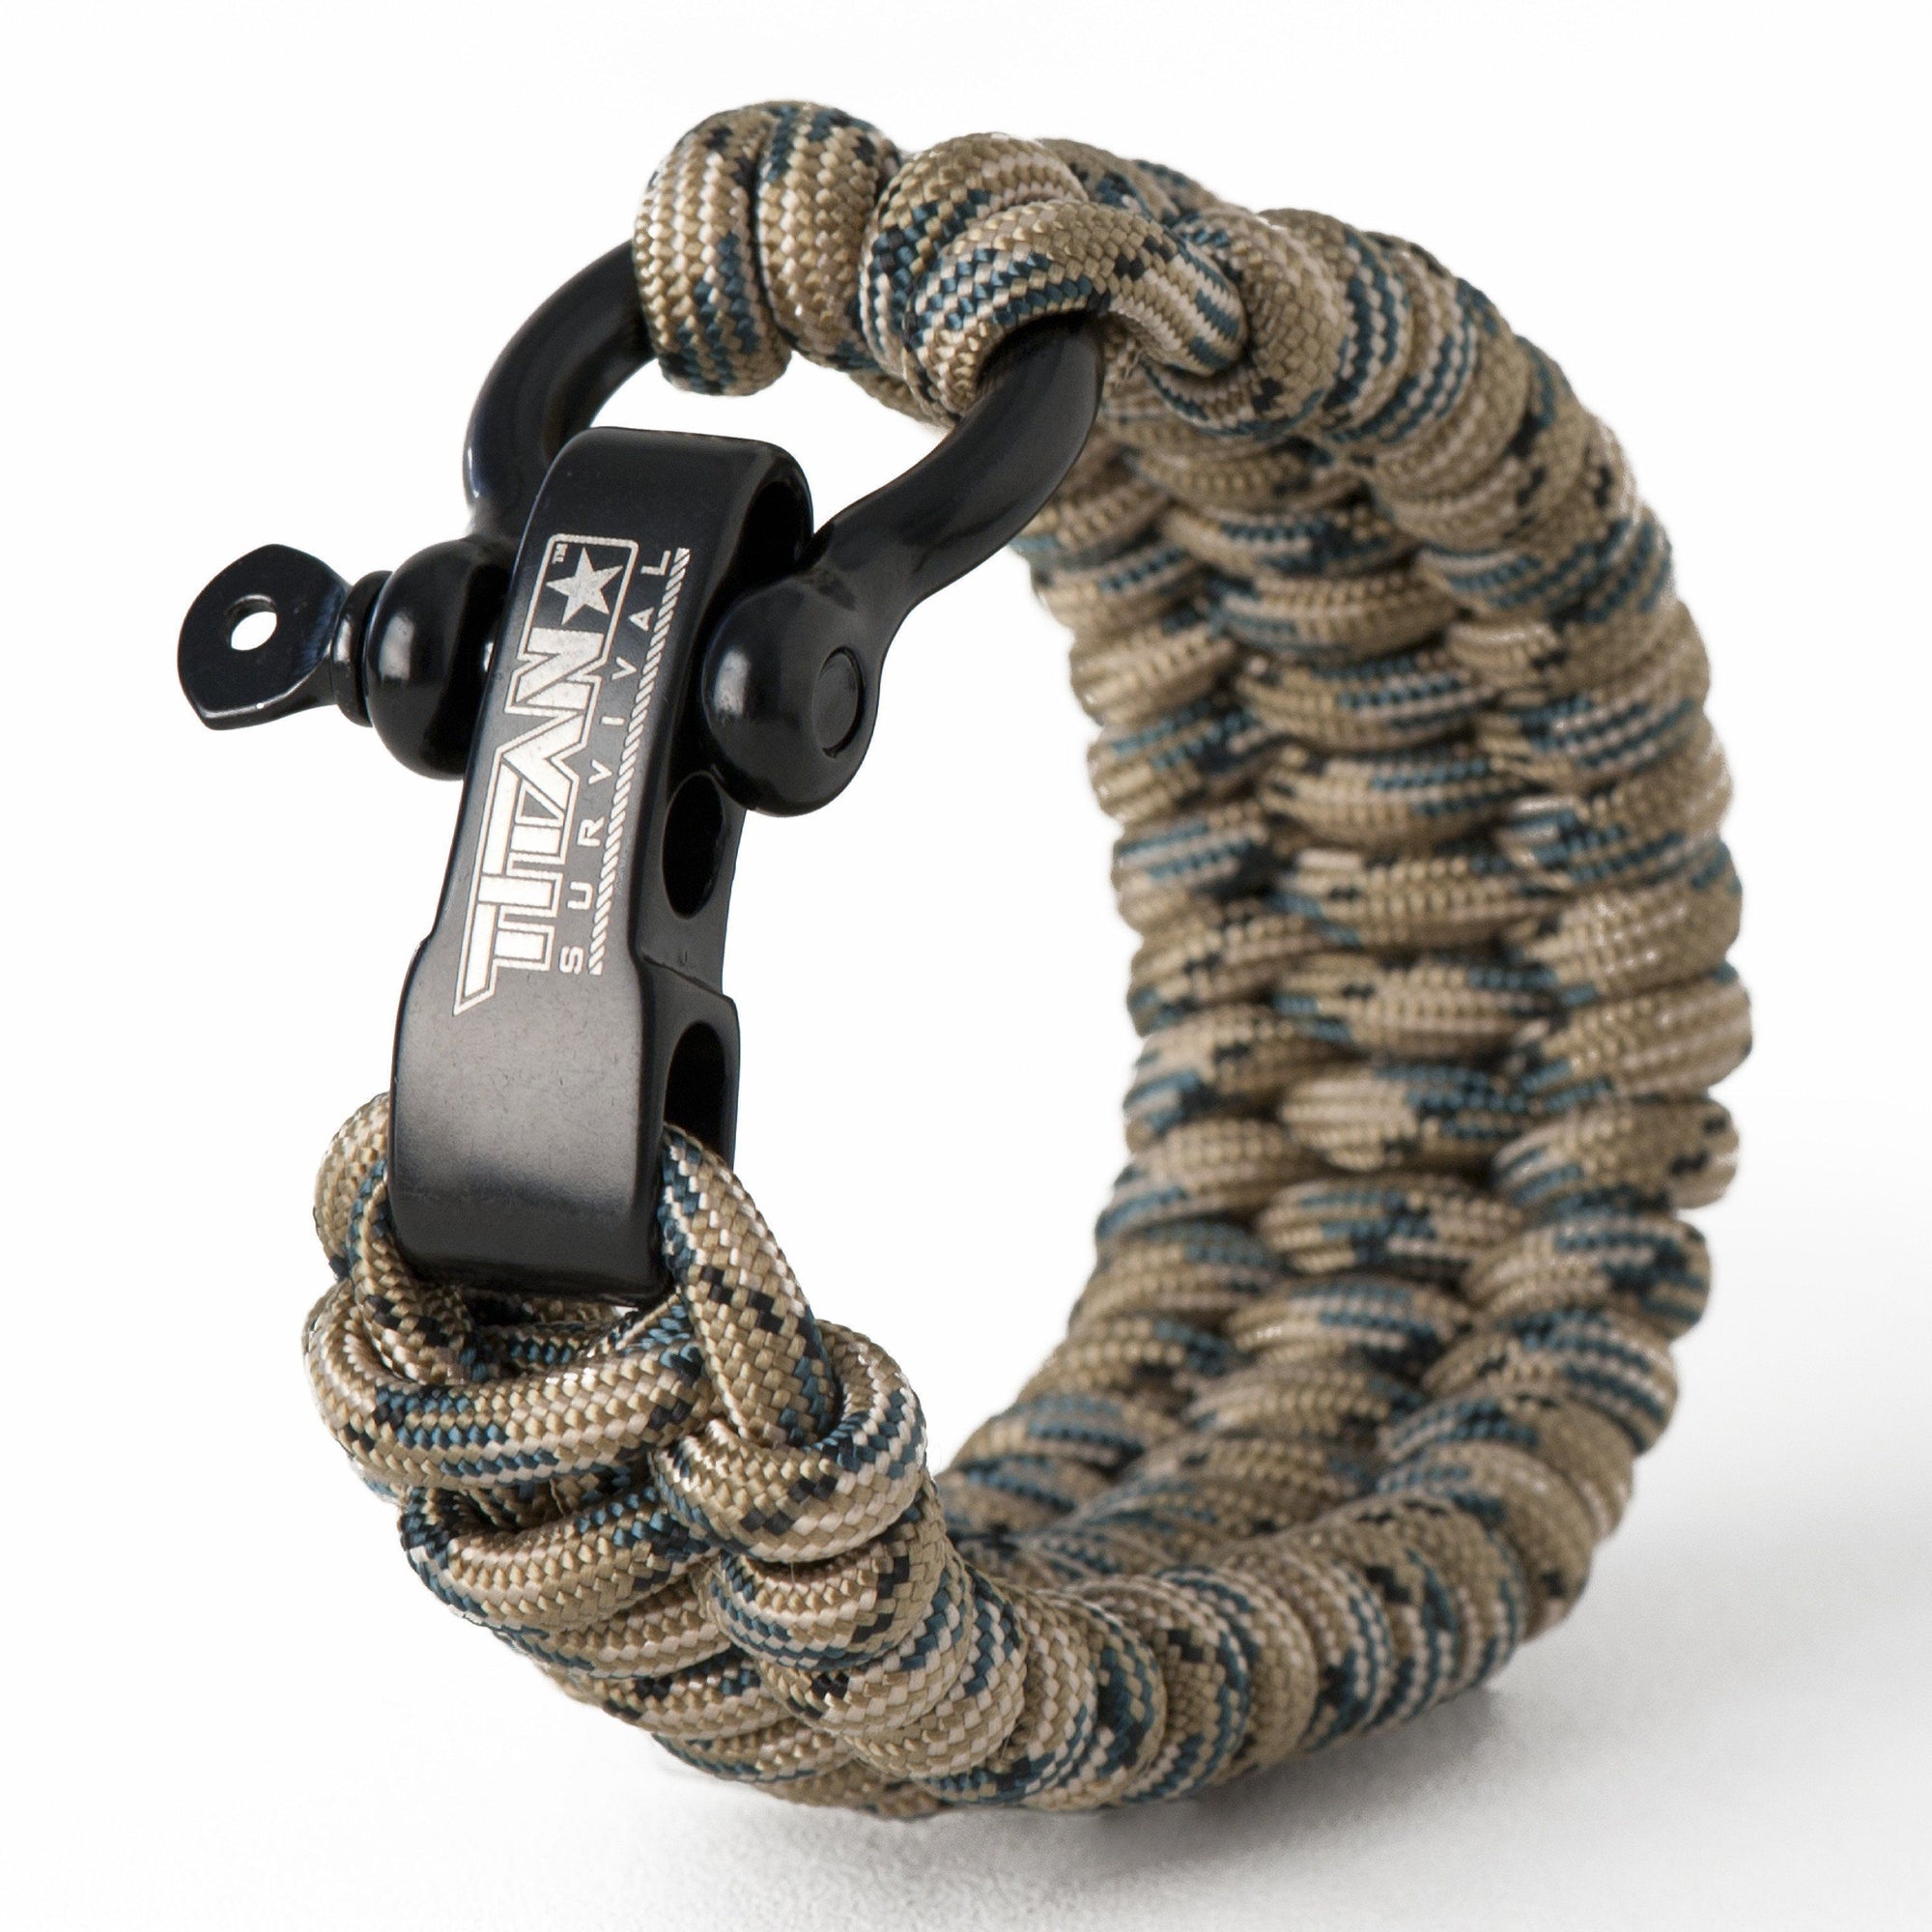 Titan Paracord Survival Bracelet | Made with Patented SurvivorCord (550 Paracord, Fishing Line, Snare Wire, and Waxed Jute for Fires)